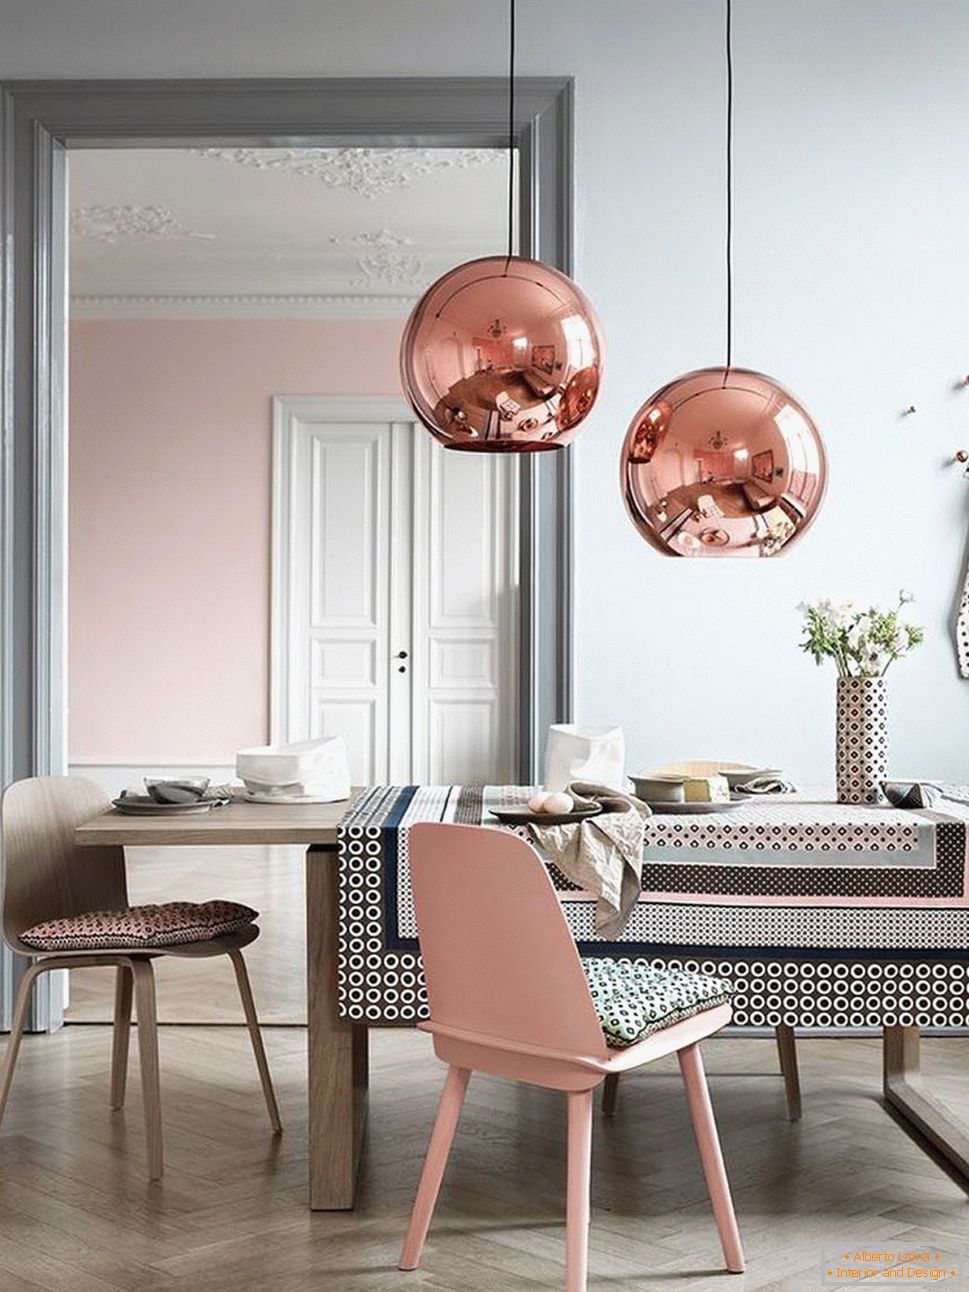 Gray-pink combination in the dining room